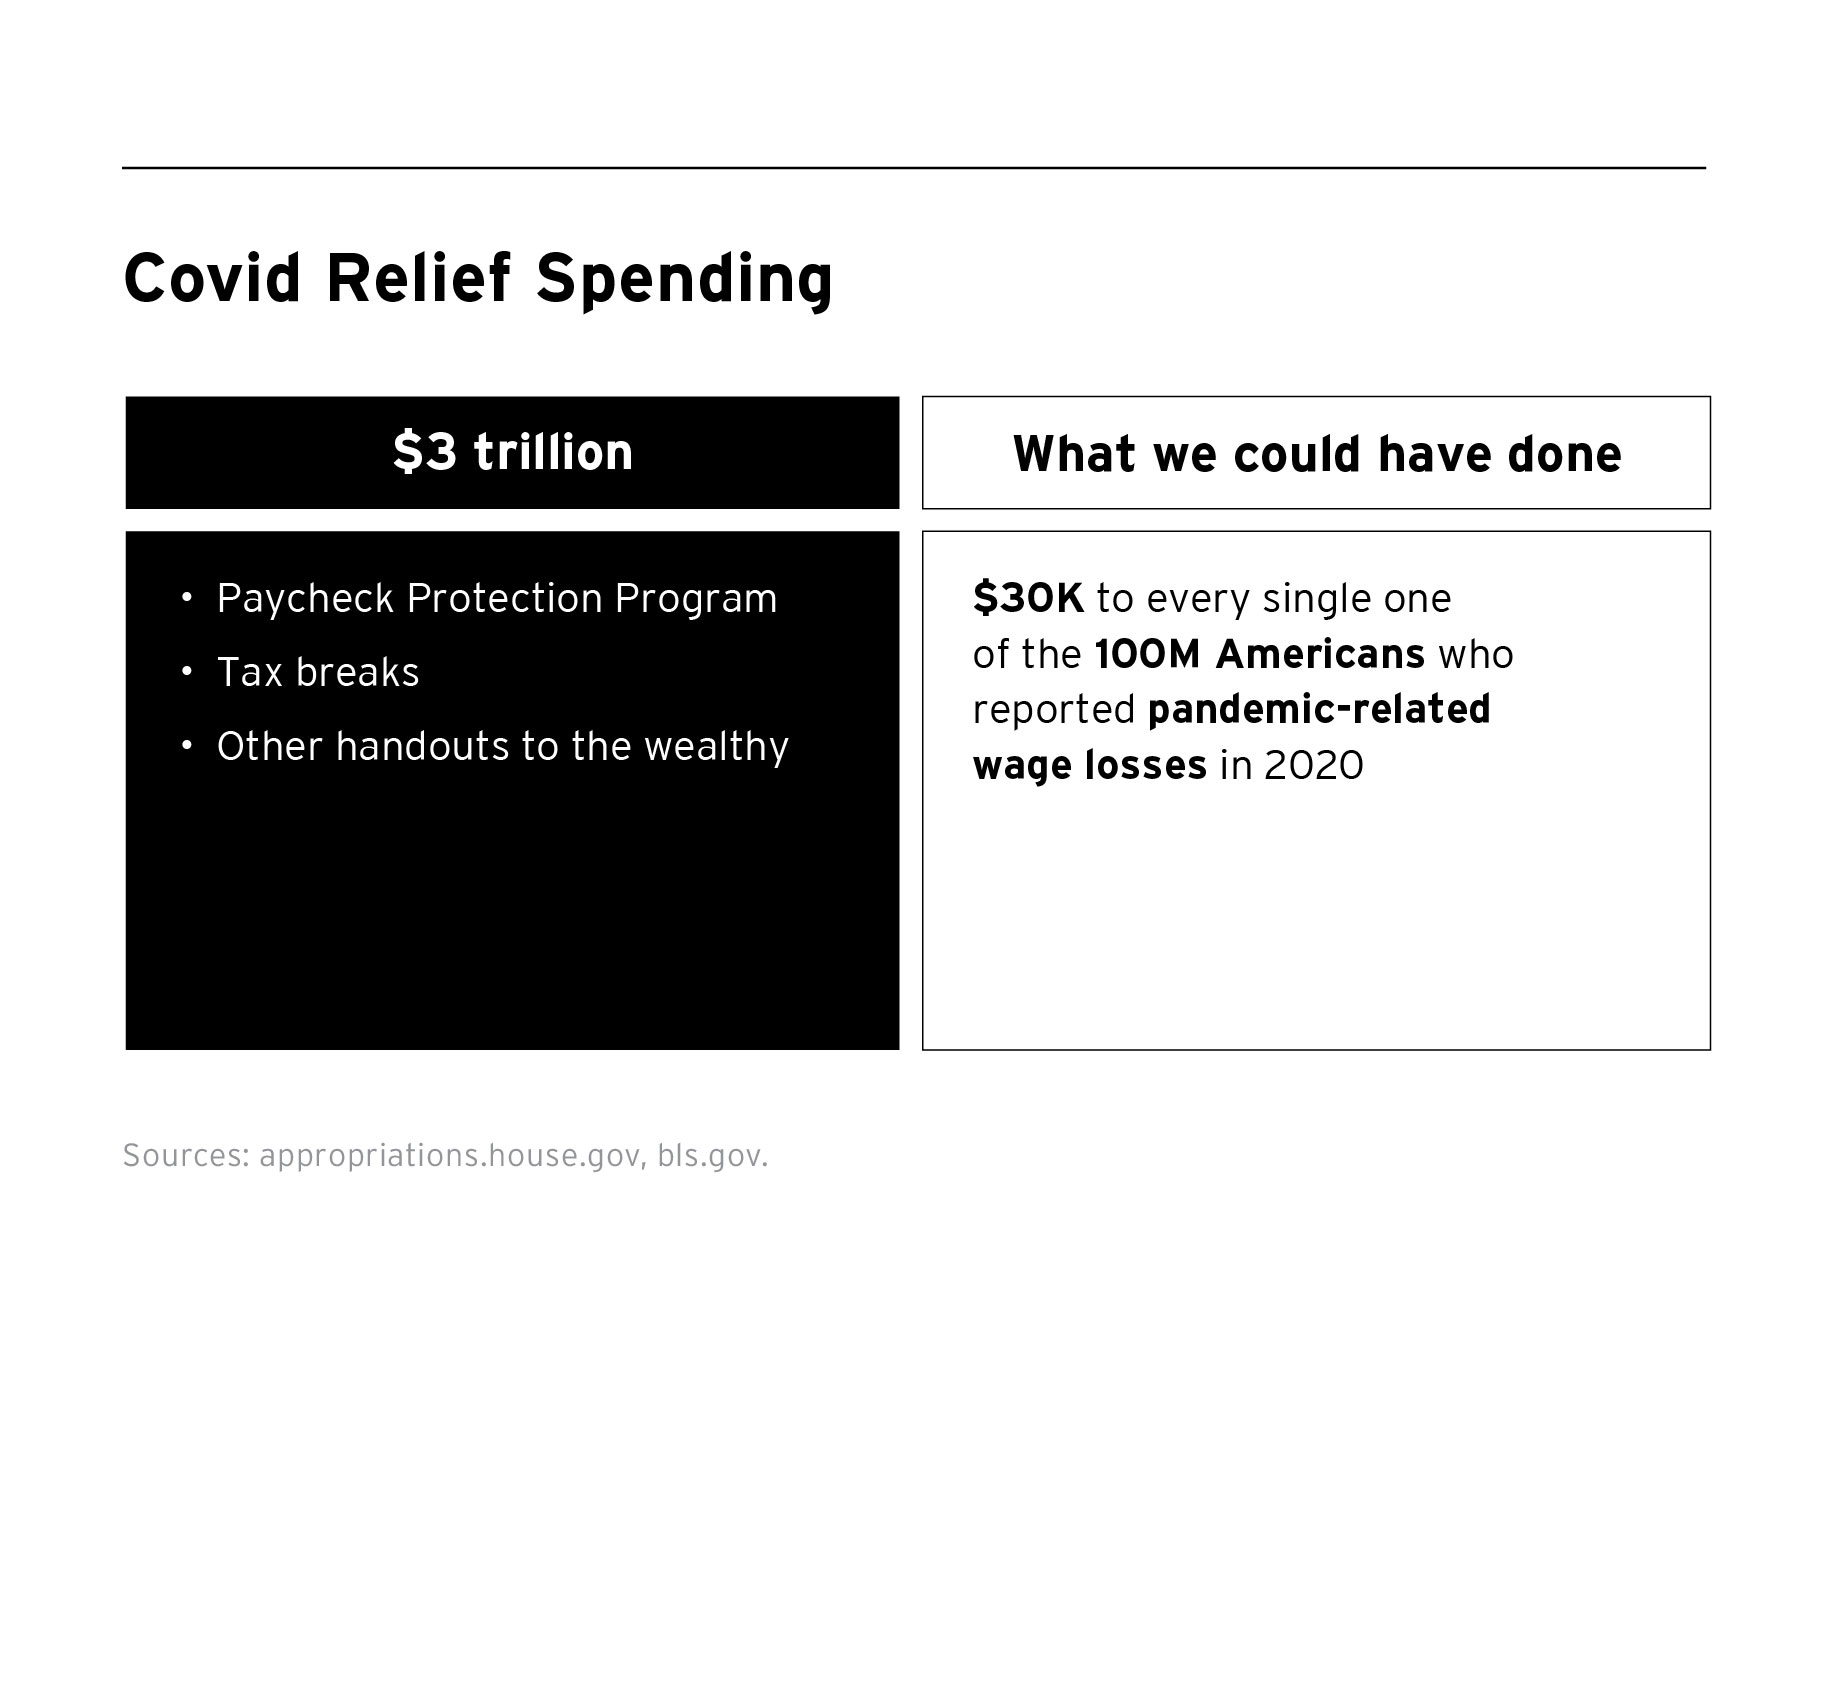 a chart showing Covid relief spending in the U.S.